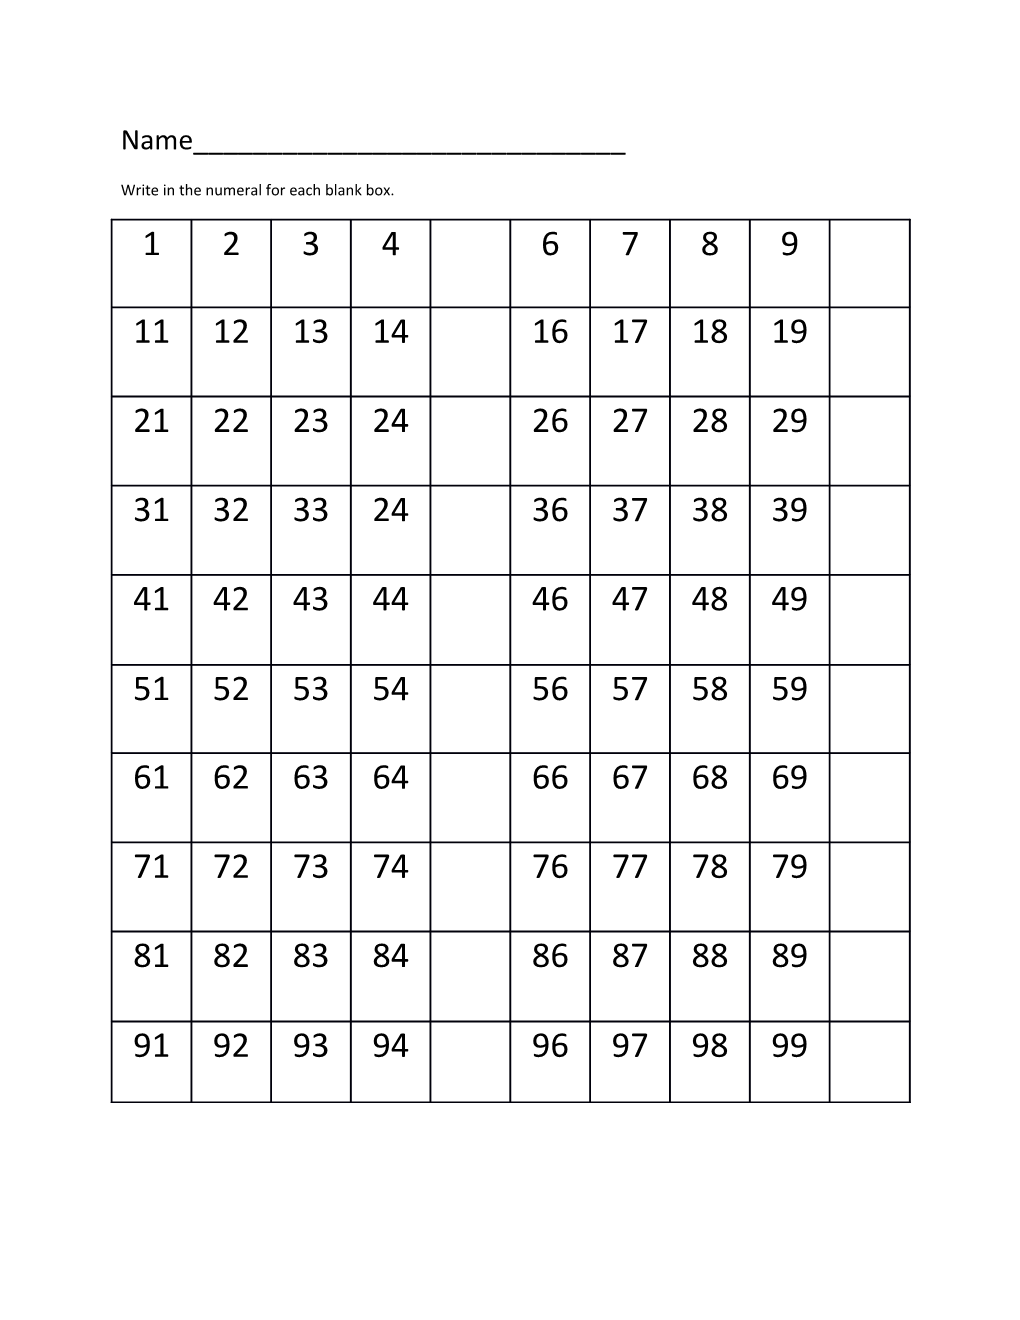 Write in the Numeral for Each Blank Box